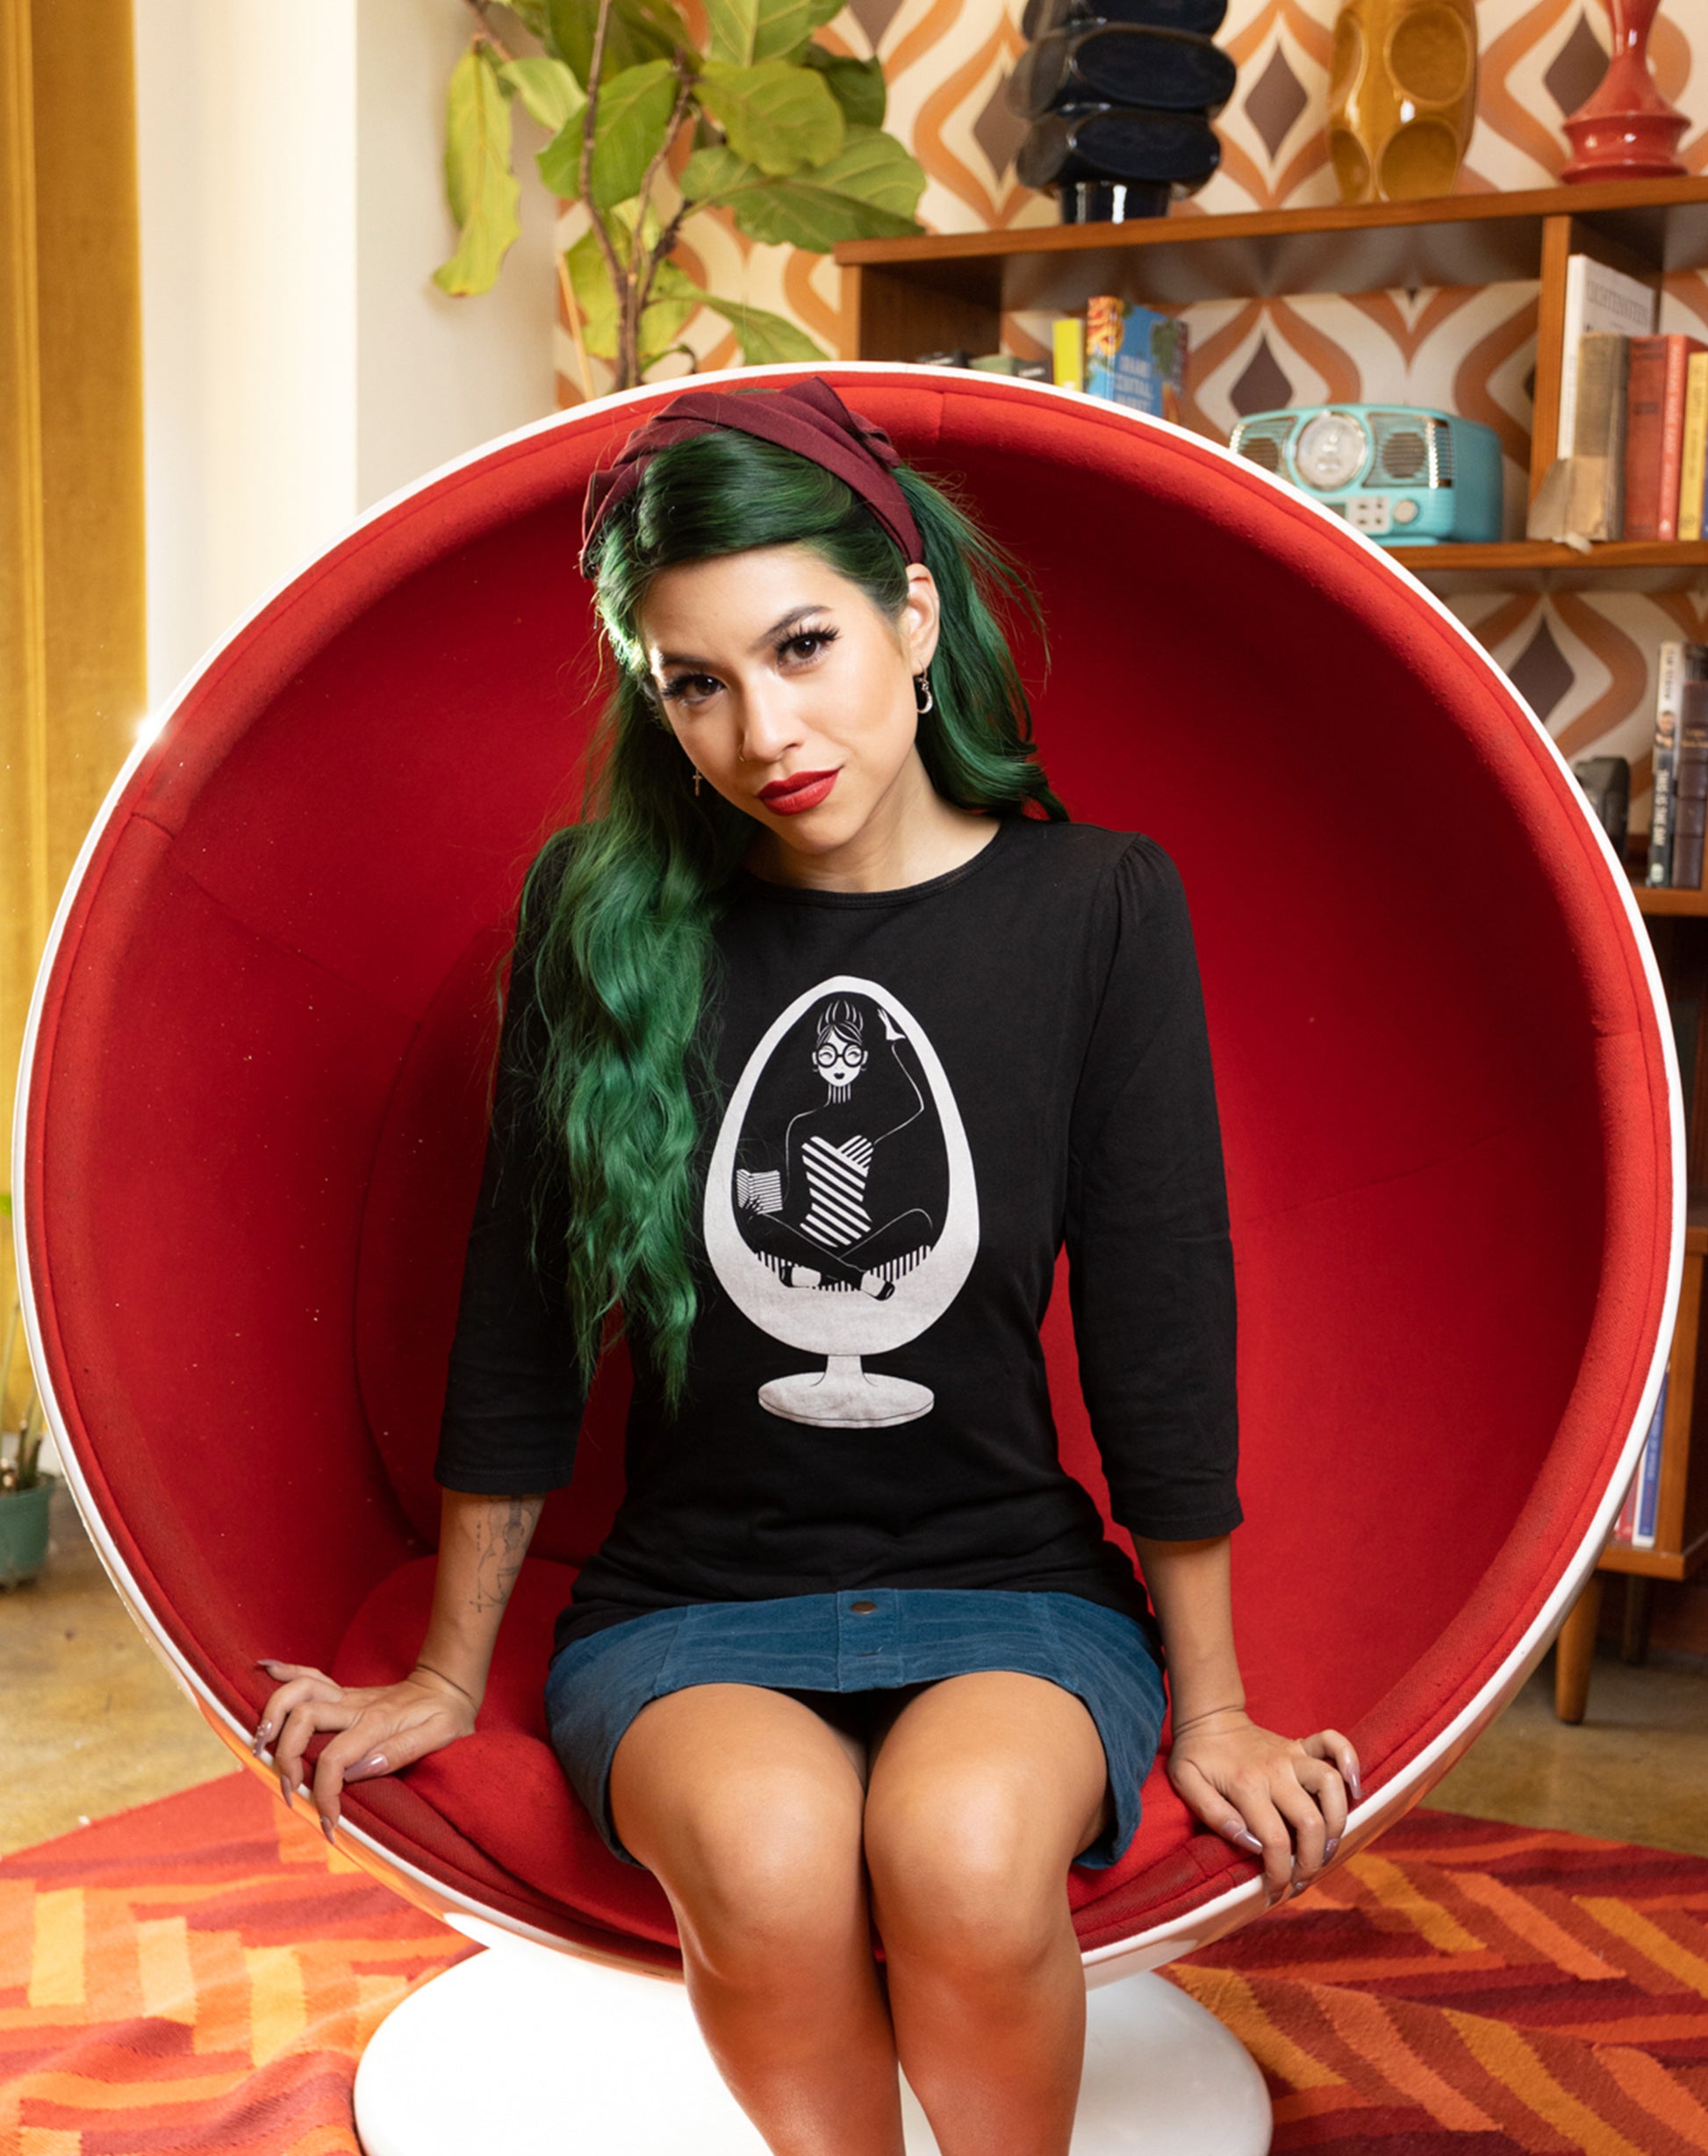 Long-haired girl sitting in ball chair wearing black 3/4 sleeve tee with white graphic of girl reading in a vintage egg chair